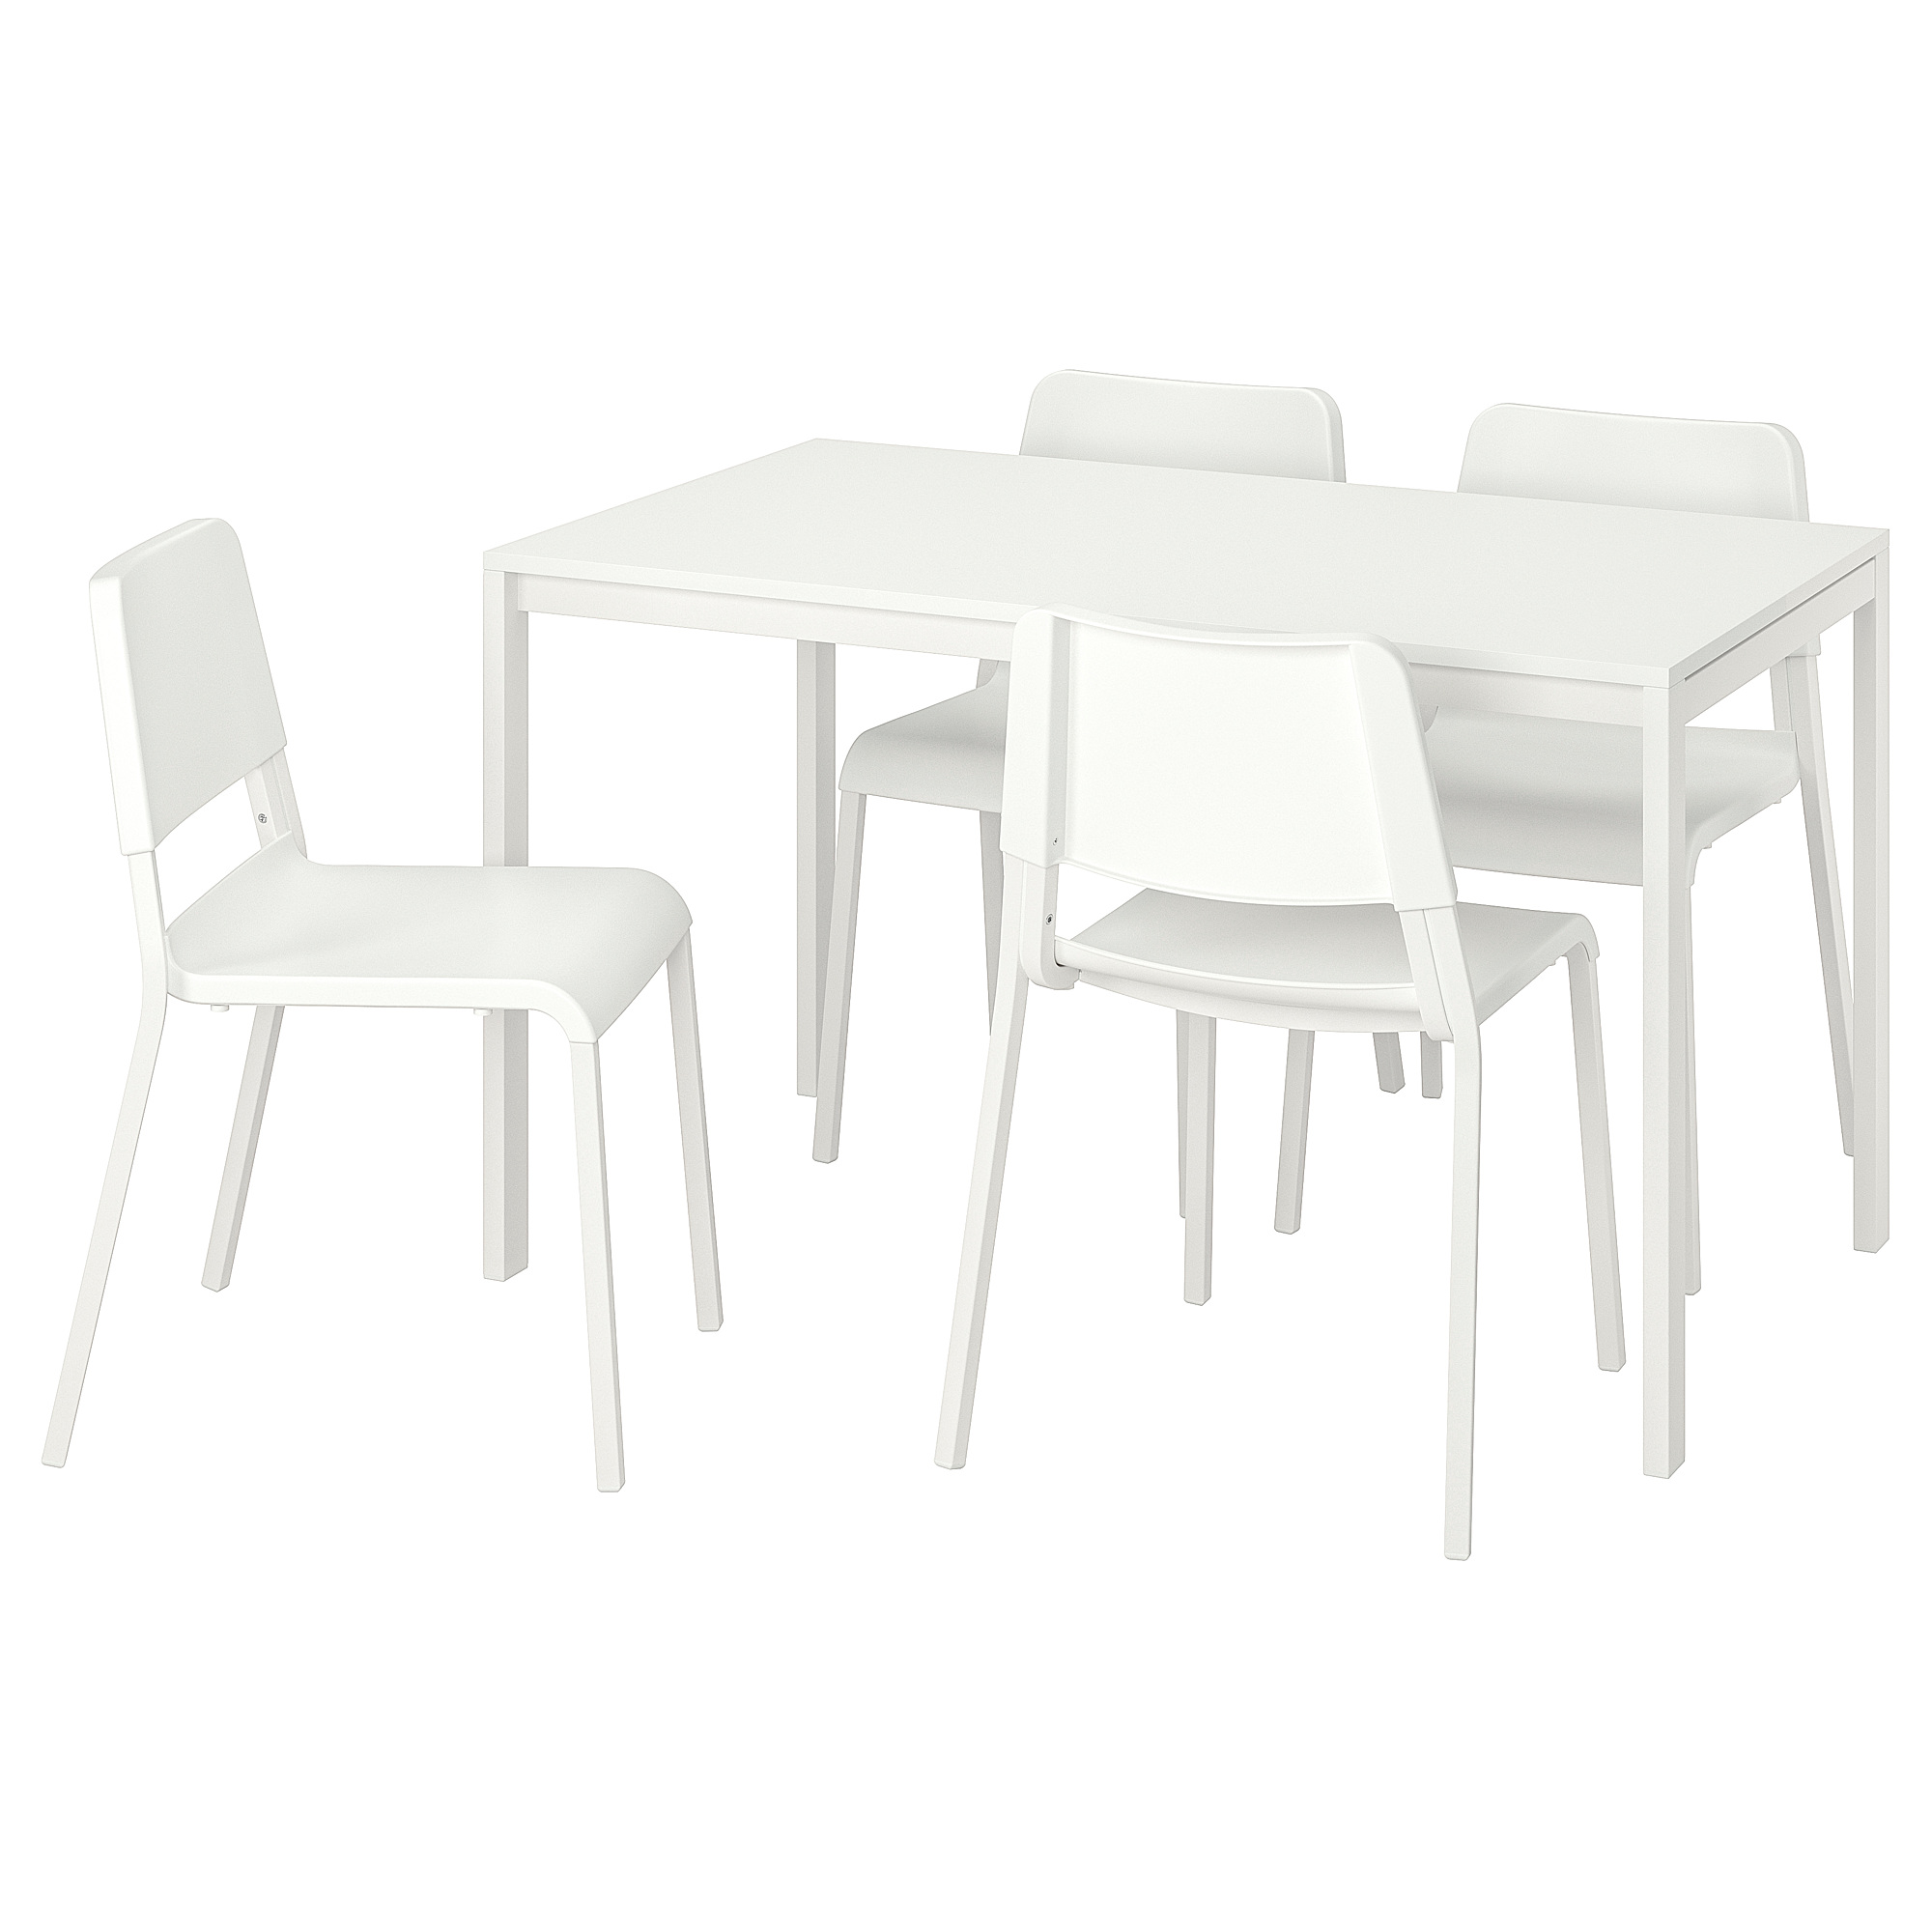 MELLTORP/TEODORES table and 4 chairs